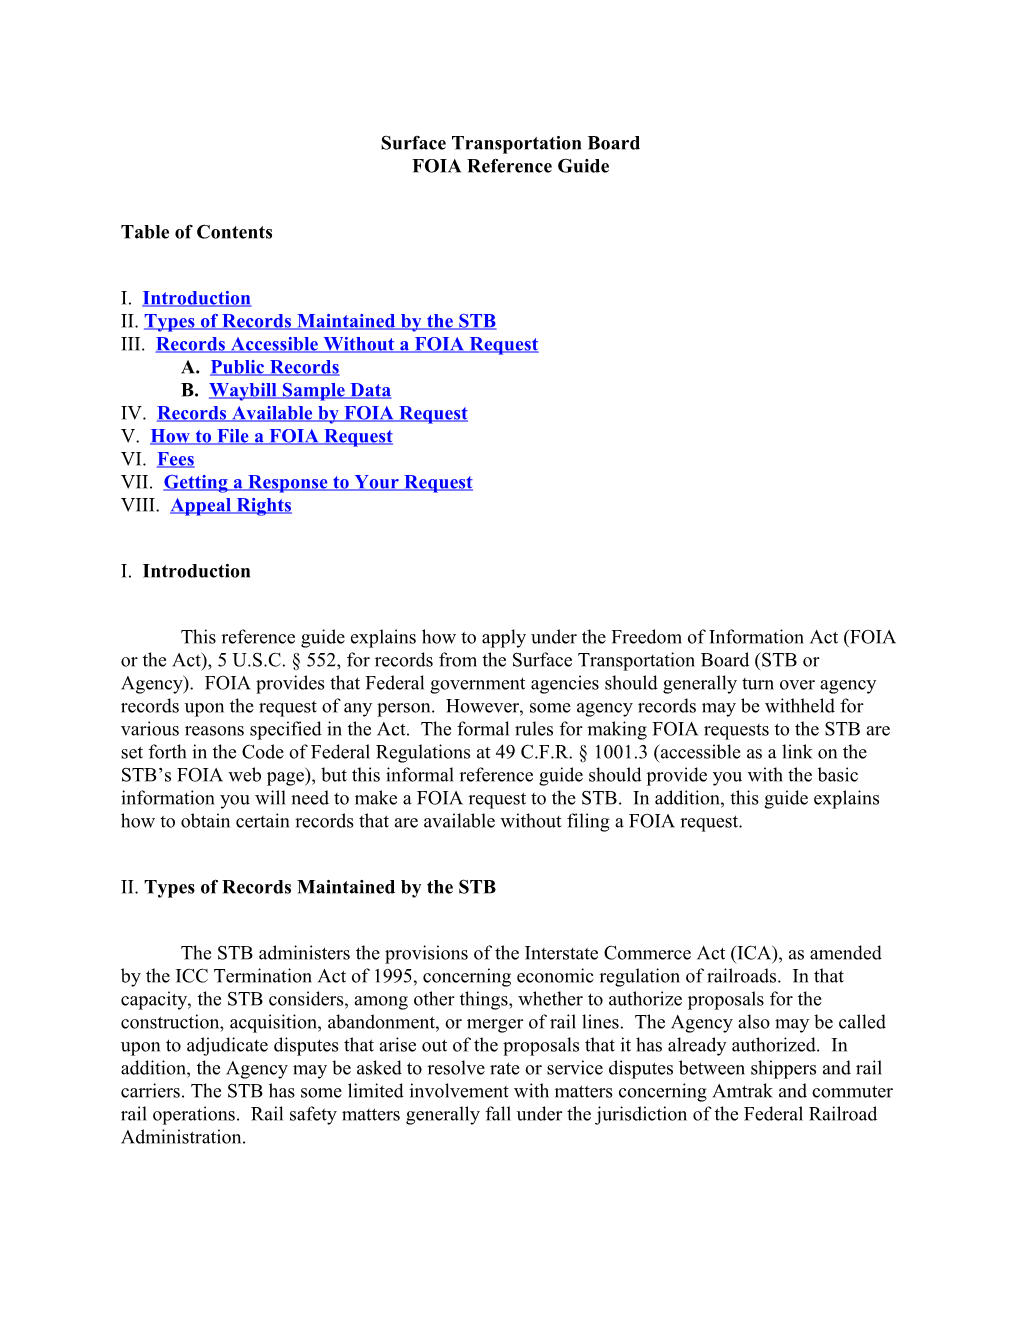 Surface Transportation Board FOIA Reference Guide